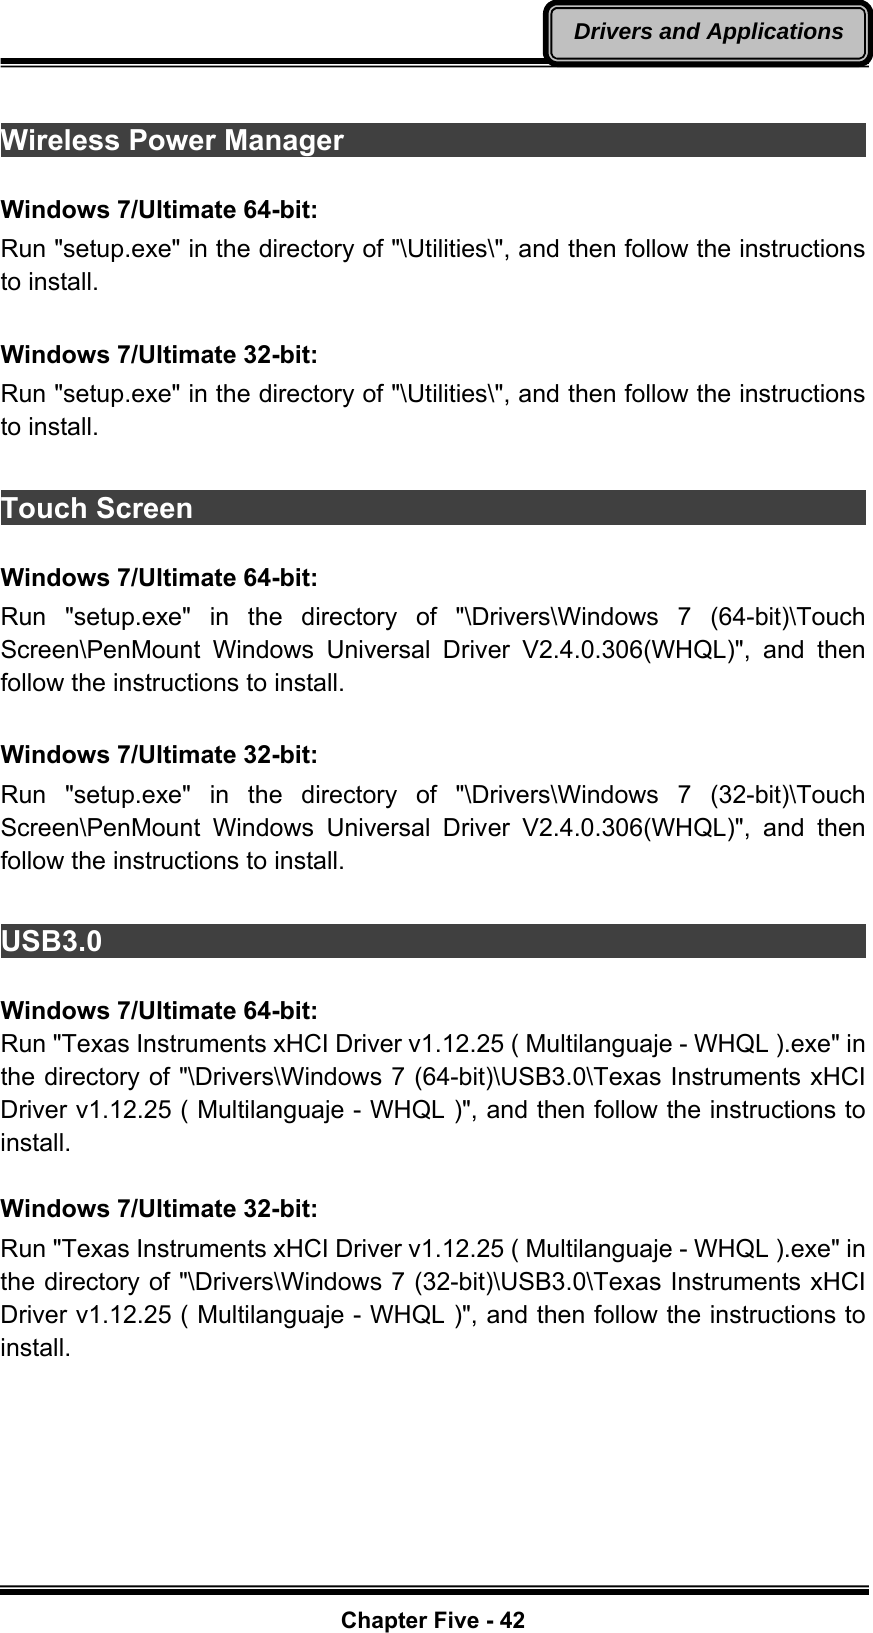   Chapter Five - 42Drivers and Applications Wireless Power Manager                                                  Windows 7/Ultimate 64-bit: Run &quot;setup.exe&quot; in the directory of &quot;\Utilities\&quot;, and then follow the instructions to install.  Windows 7/Ultimate 32-bit: Run &quot;setup.exe&quot; in the directory of &quot;\Utilities\&quot;, and then follow the instructions to install.  Touch Screen                                                            Windows 7/Ultimate 64-bit: Run &quot;setup.exe&quot; in the directory of &quot;\Drivers\Windows 7 (64-bit)\Touch Screen\PenMount Windows Universal Driver V2.4.0.306(WHQL)&quot;, and then follow the instructions to install.  Windows 7/Ultimate 32-bit: Run &quot;setup.exe&quot; in the directory of &quot;\Drivers\Windows 7 (32-bit)\Touch Screen\PenMount Windows Universal Driver V2.4.0.306(WHQL)&quot;, and then follow the instructions to install.  USB3.0                                                                   Windows 7/Ultimate 64-bit: Run &quot;Texas Instruments xHCI Driver v1.12.25 ( Multilanguaje - WHQL ).exe&quot; in the directory of &quot;\Drivers\Windows 7 (64-bit)\USB3.0\Texas Instruments xHCI Driver v1.12.25 ( Multilanguaje - WHQL )&quot;, and then follow the instructions to install.  Windows 7/Ultimate 32-bit: Run &quot;Texas Instruments xHCI Driver v1.12.25 ( Multilanguaje - WHQL ).exe&quot; in the directory of &quot;\Drivers\Windows 7 (32-bit)\USB3.0\Texas Instruments xHCI Driver v1.12.25 ( Multilanguaje - WHQL )&quot;, and then follow the instructions to install. 